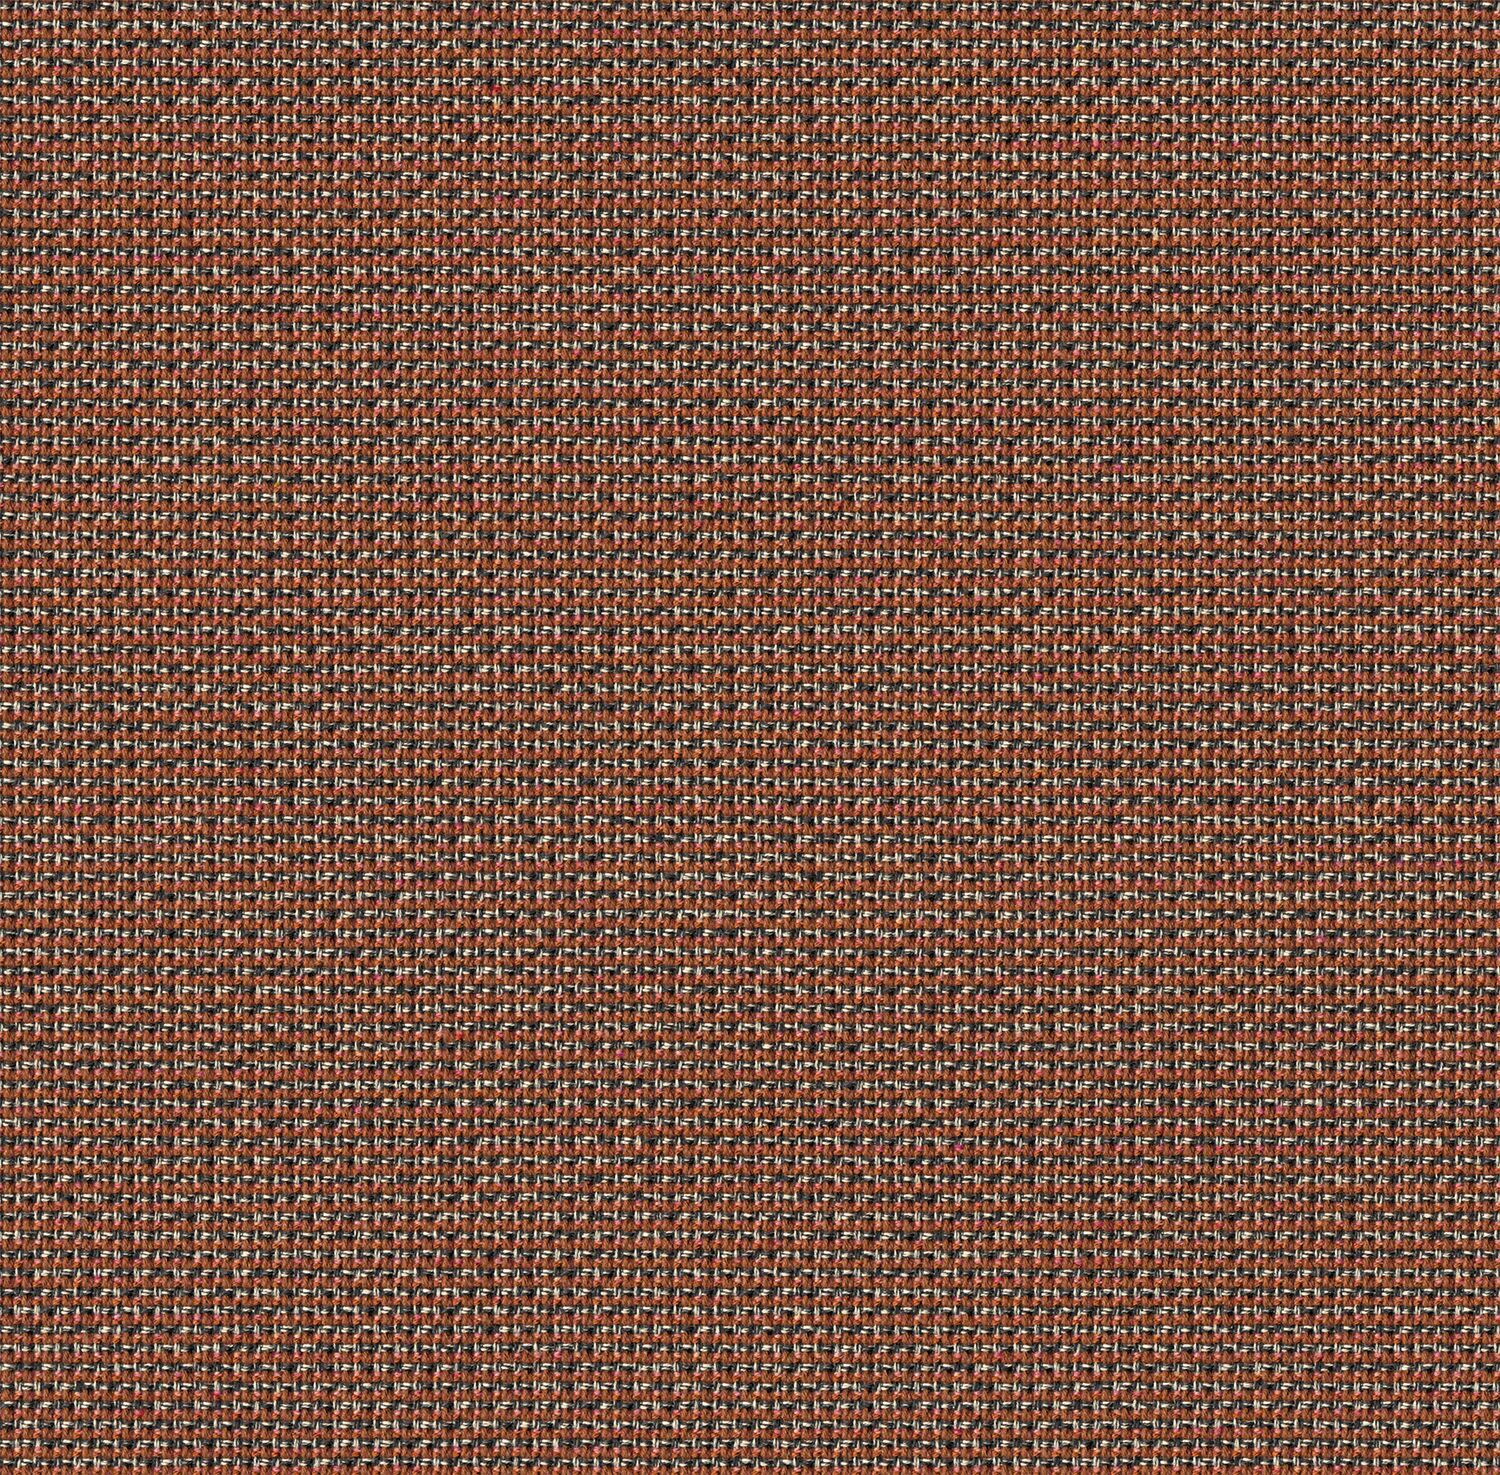 Barberpole Basket - Copper Coil - 4114 - 08 - Half Yard Tileable Swatches